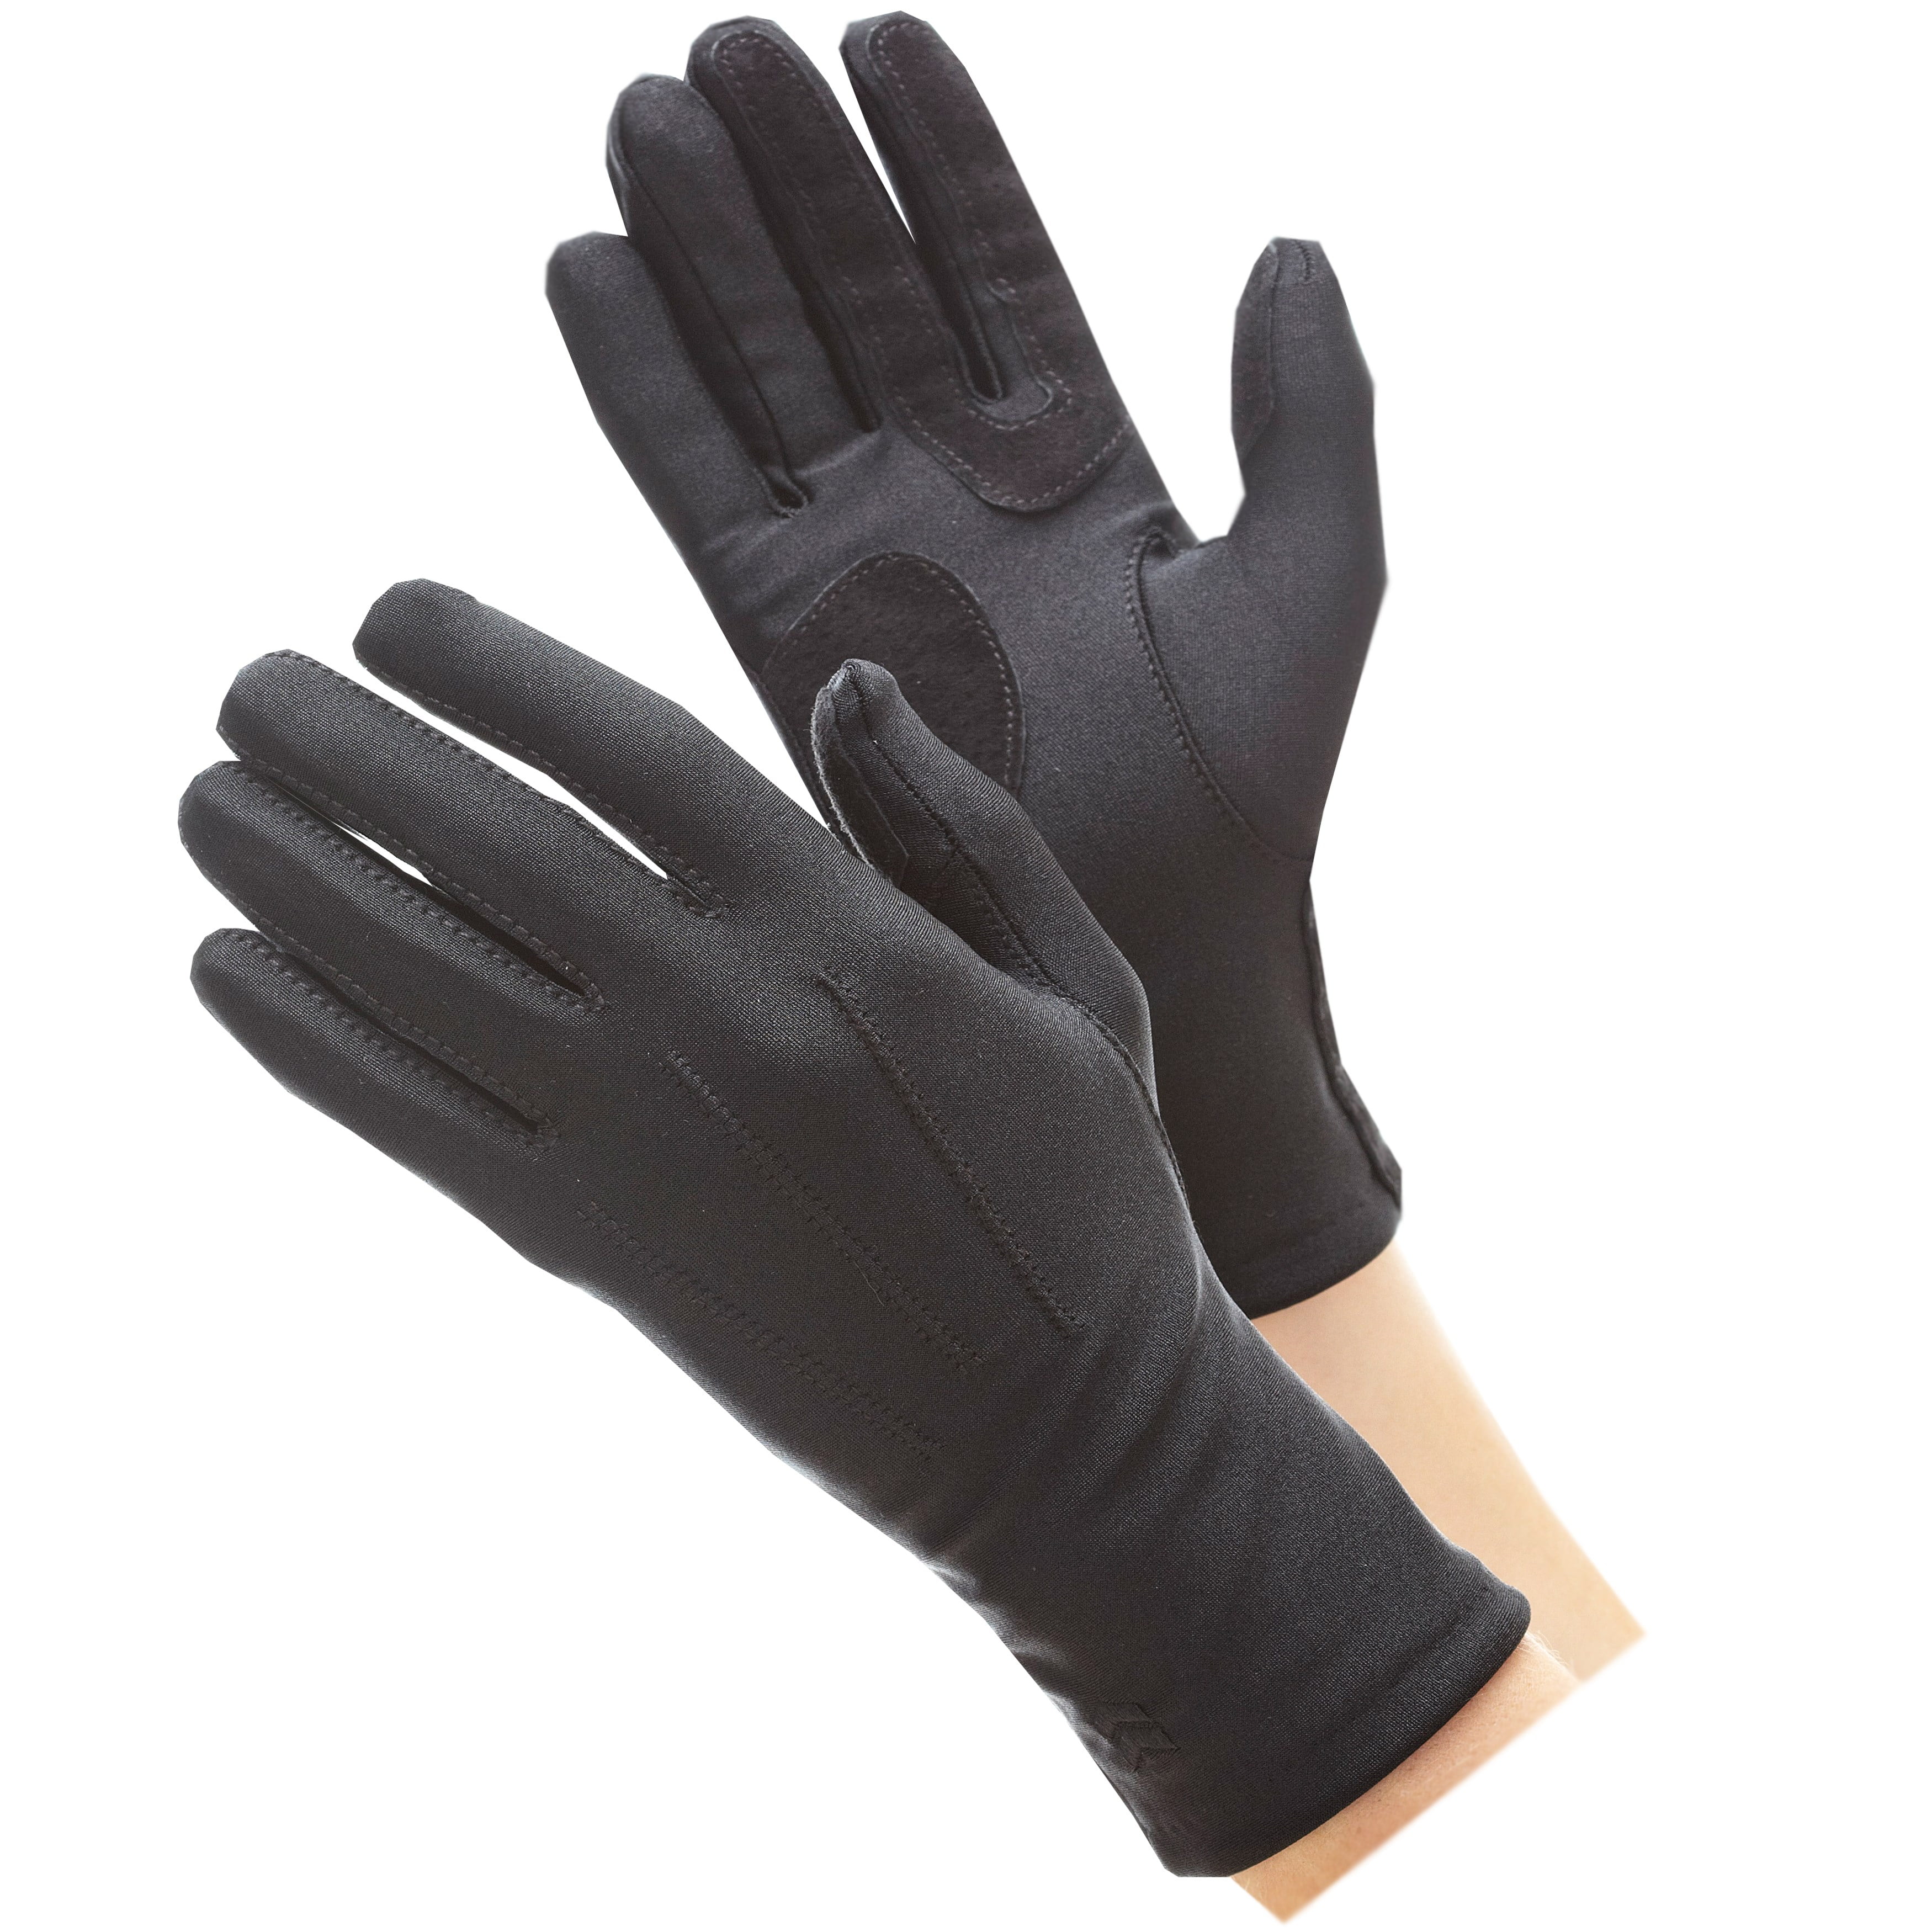 Isotoner womens Isotoner Women/'s Spandex Cold Weather Stretch Gloves With Warm Fleece Lining